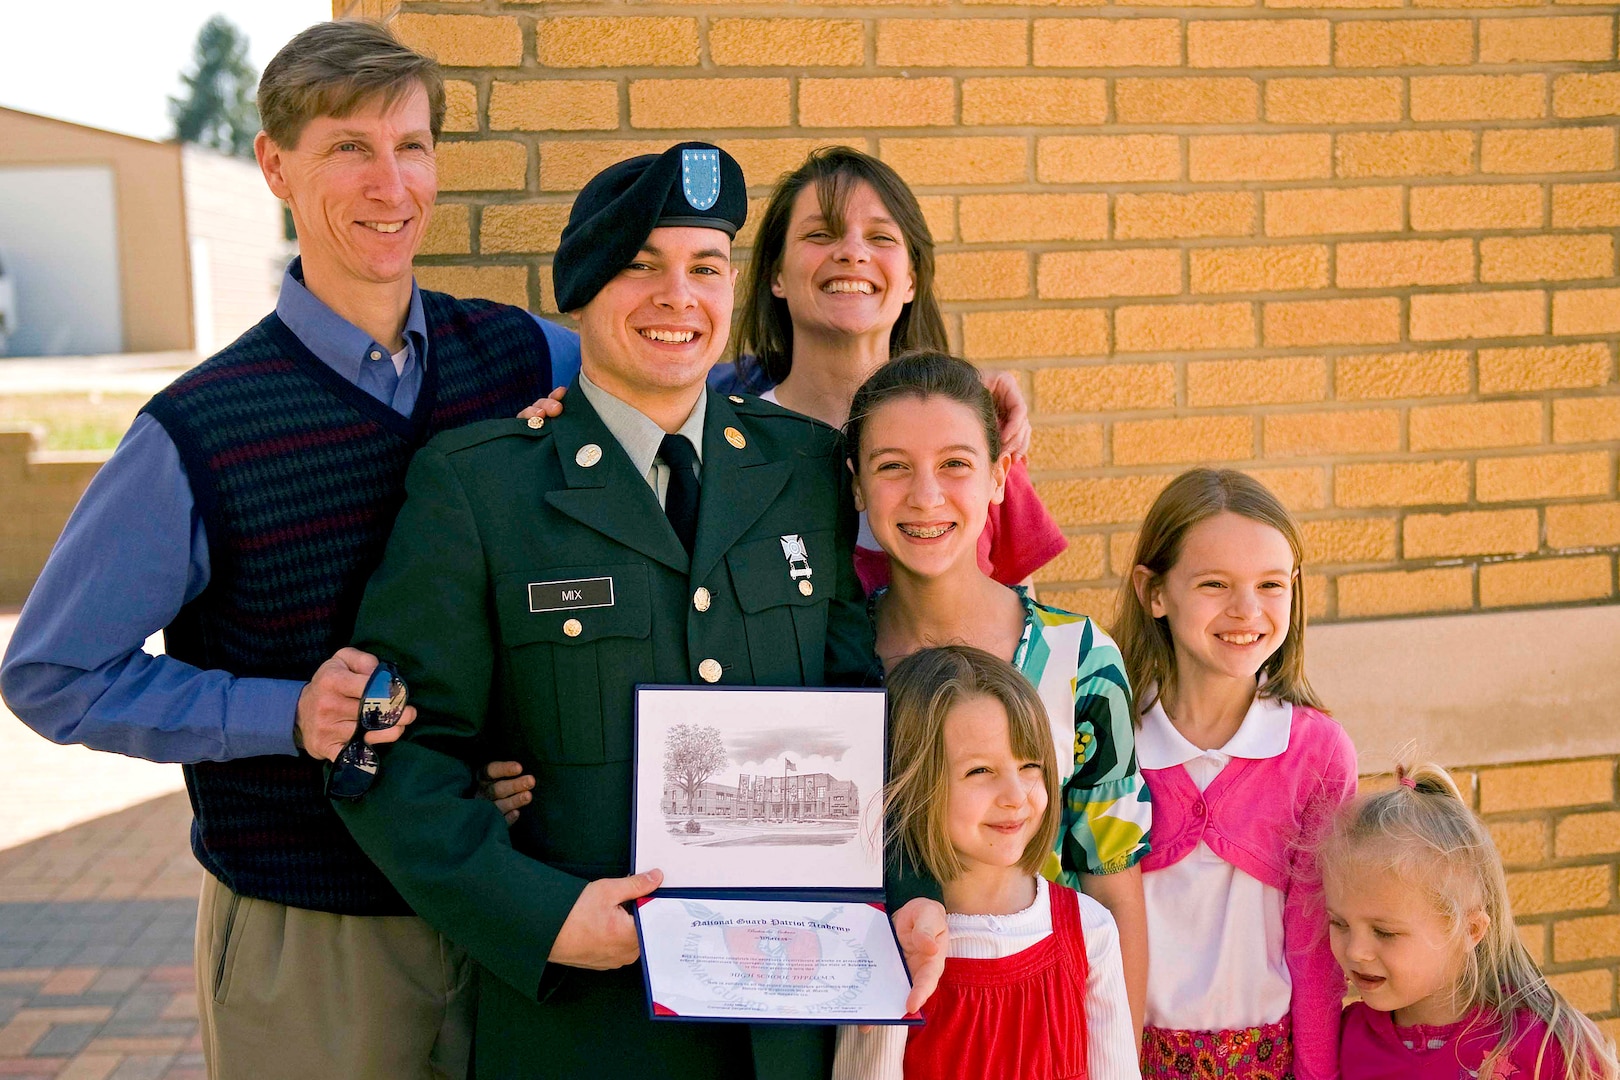 Private 1st Class Scott Wayne proudly holds his newly earned high school diploma while posing for photos with his family members at the Patriot Academy's first graduation ceremony at the Muscatatuck Urban Training Center in Butlerville, Ind., March 18, 2010. The Army National Guard's Patriot Academy is the U.S. military's first accredited high school.